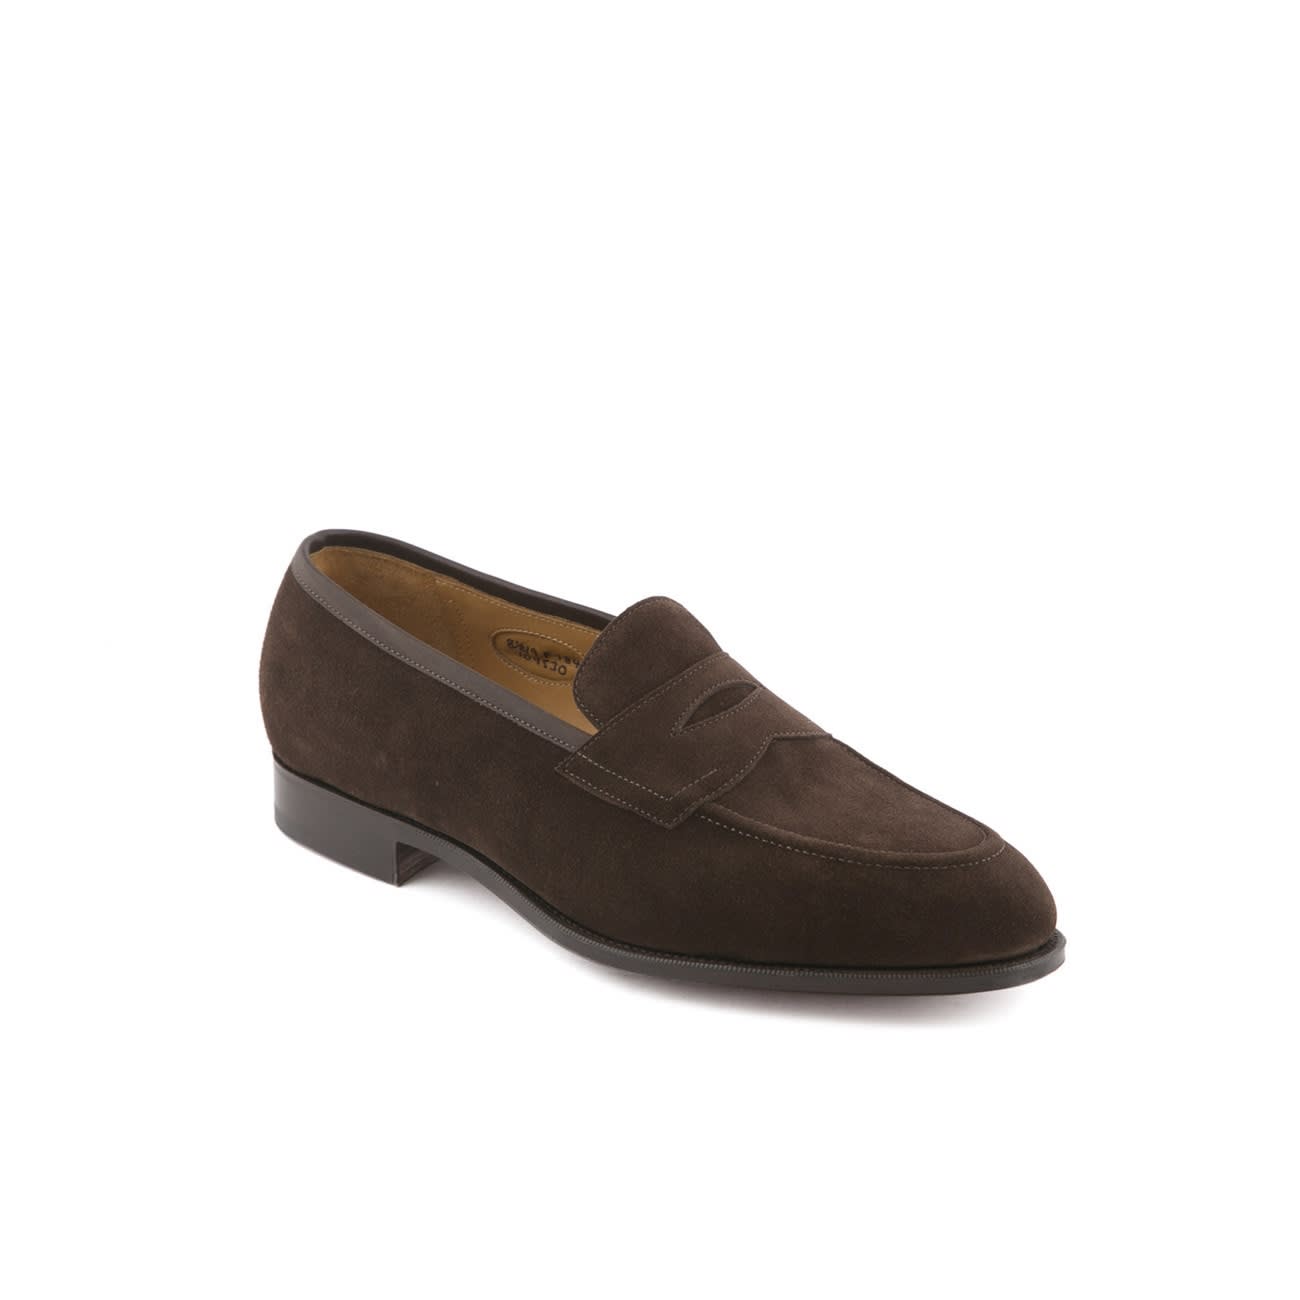 Edward Green Piccadilly Mocca Suede Penny Loafer